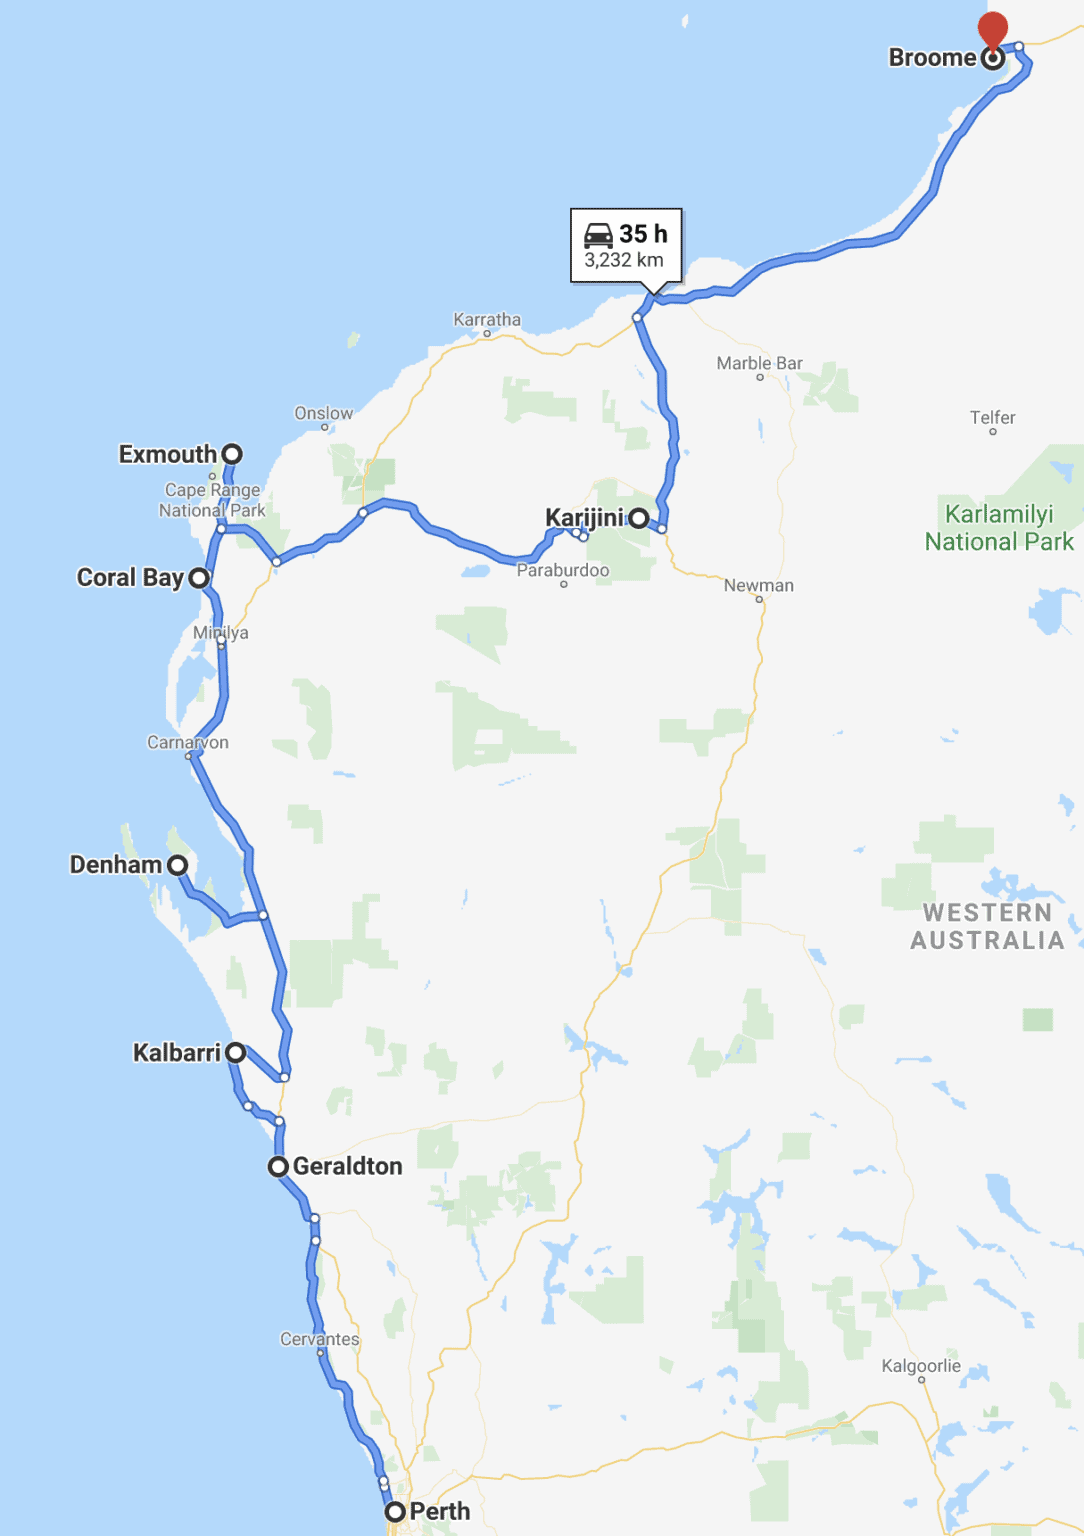 road trip from broome to perth